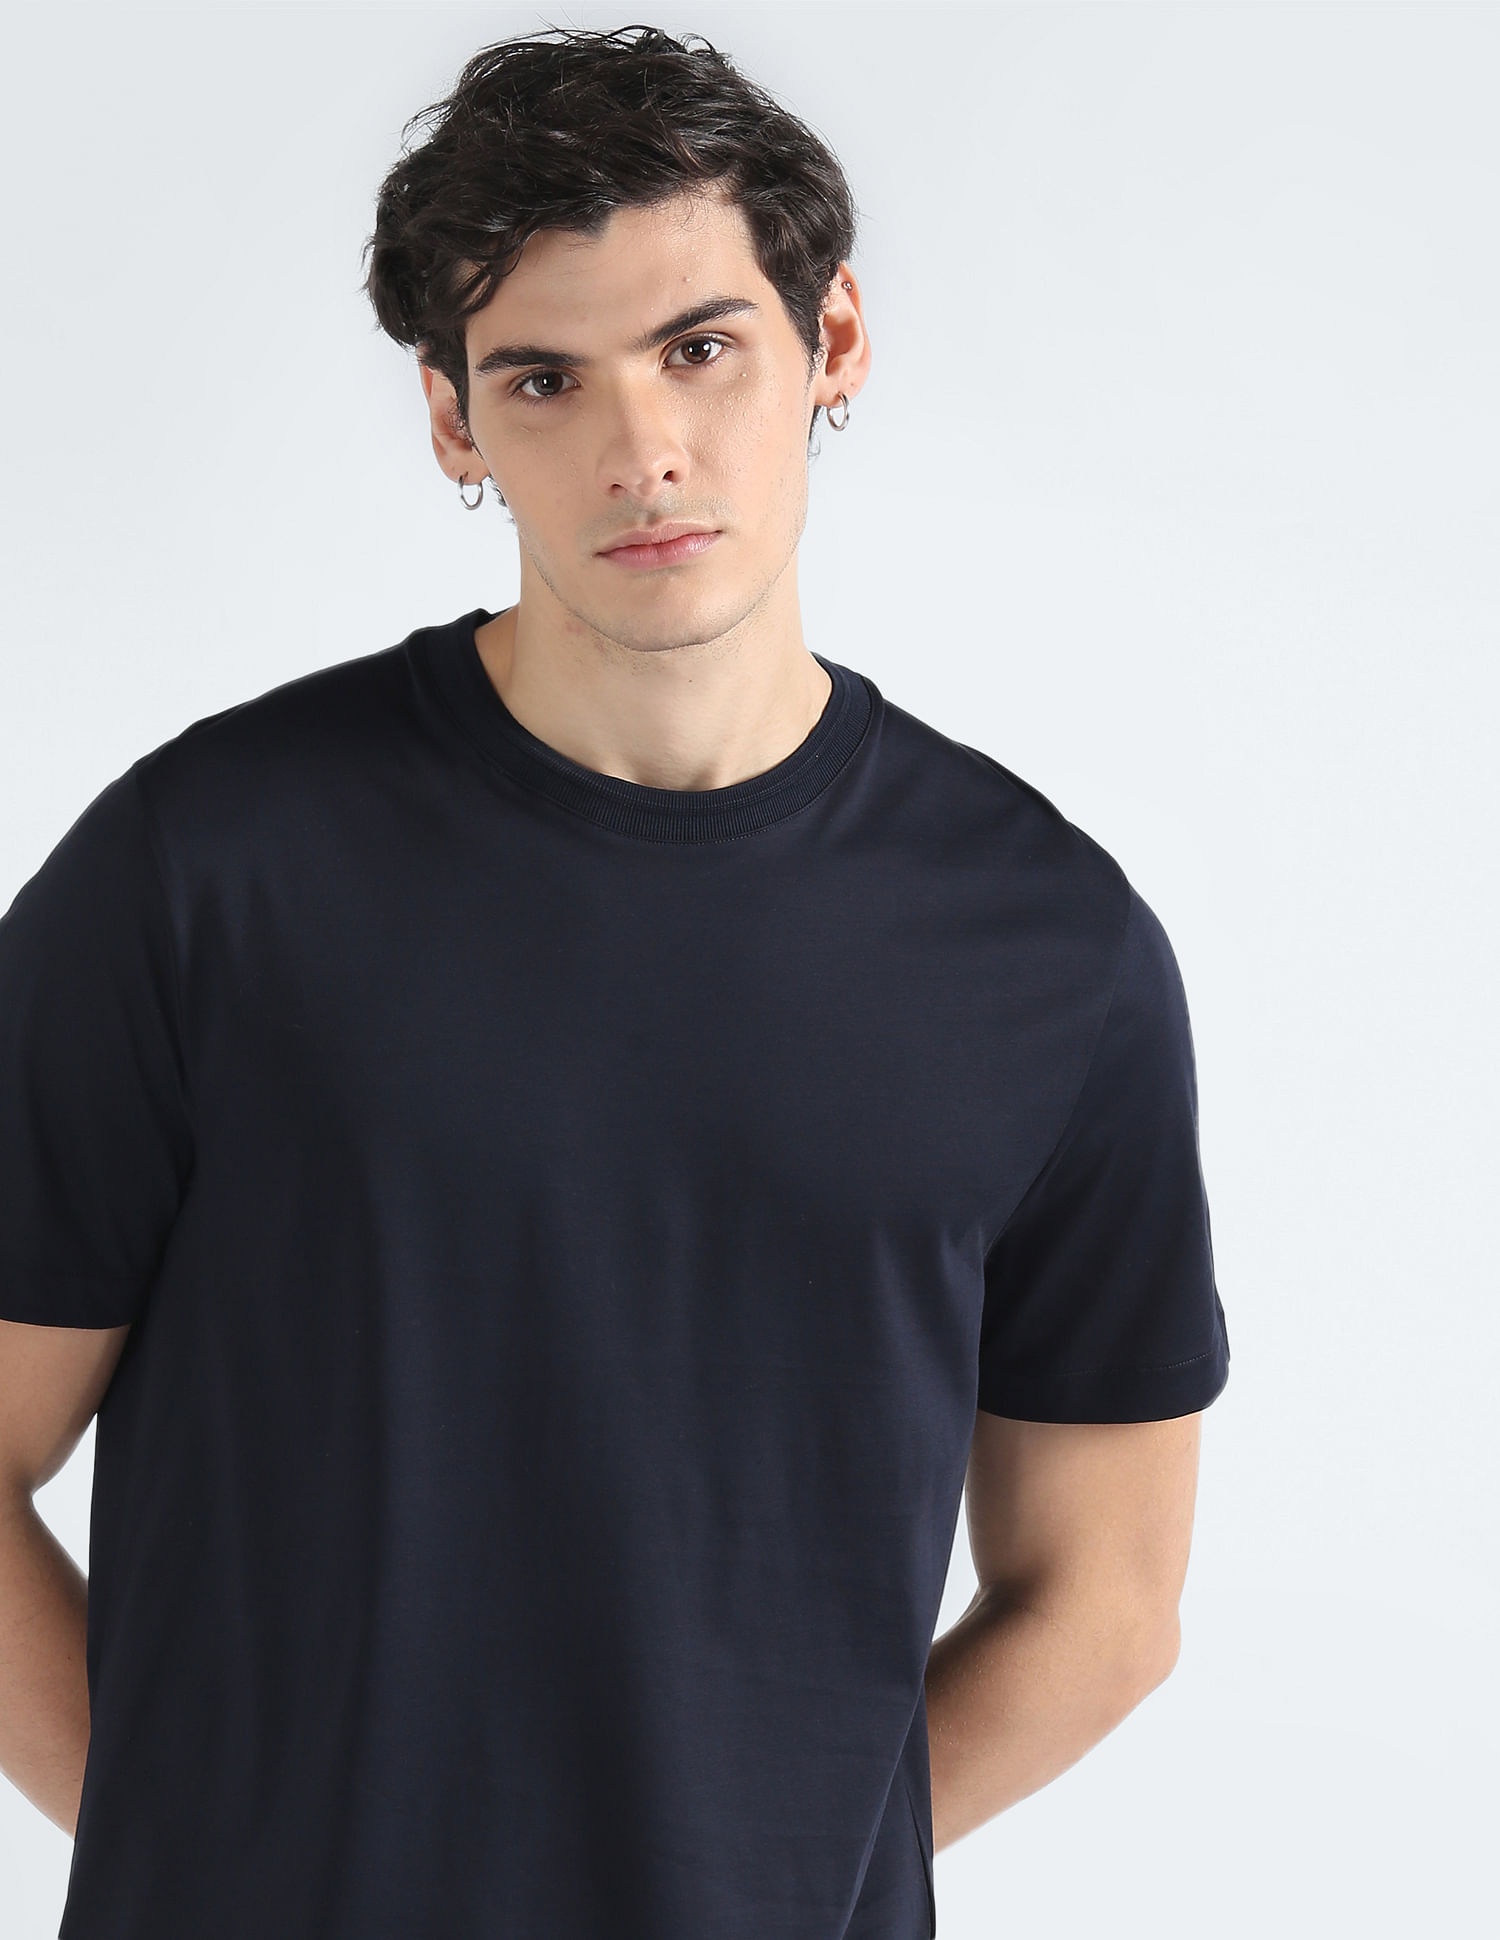 Buy Tommy Hilfiger Solid Mercerized Cotton T-Shirt - NNNOW.com